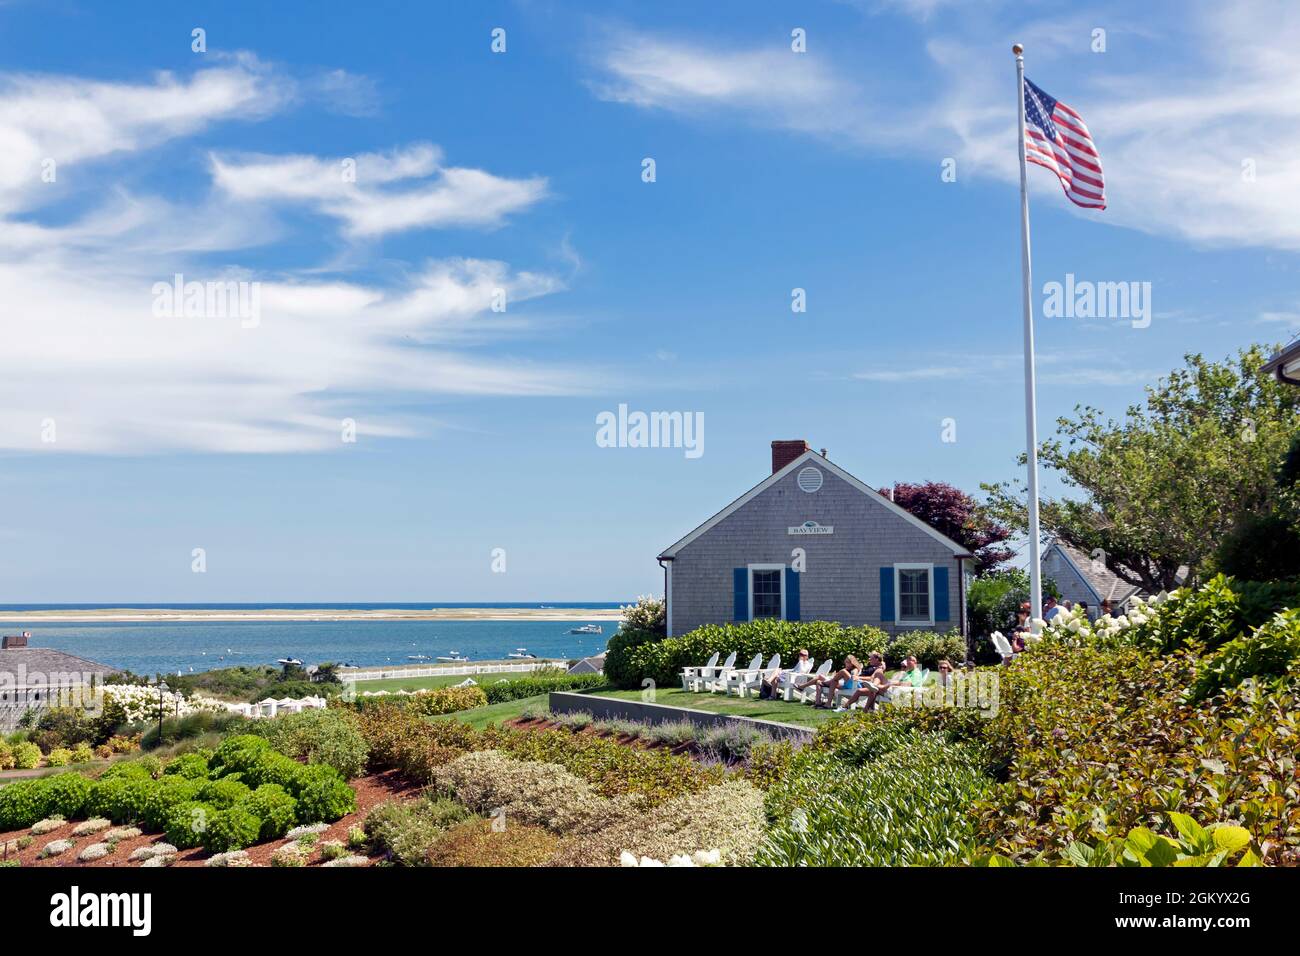 Visitors relaxing on lawn chairs overlooking ocean at Chatham Bars Inn, Chatham, Massachusetts (Cape Cod). Stock Photo